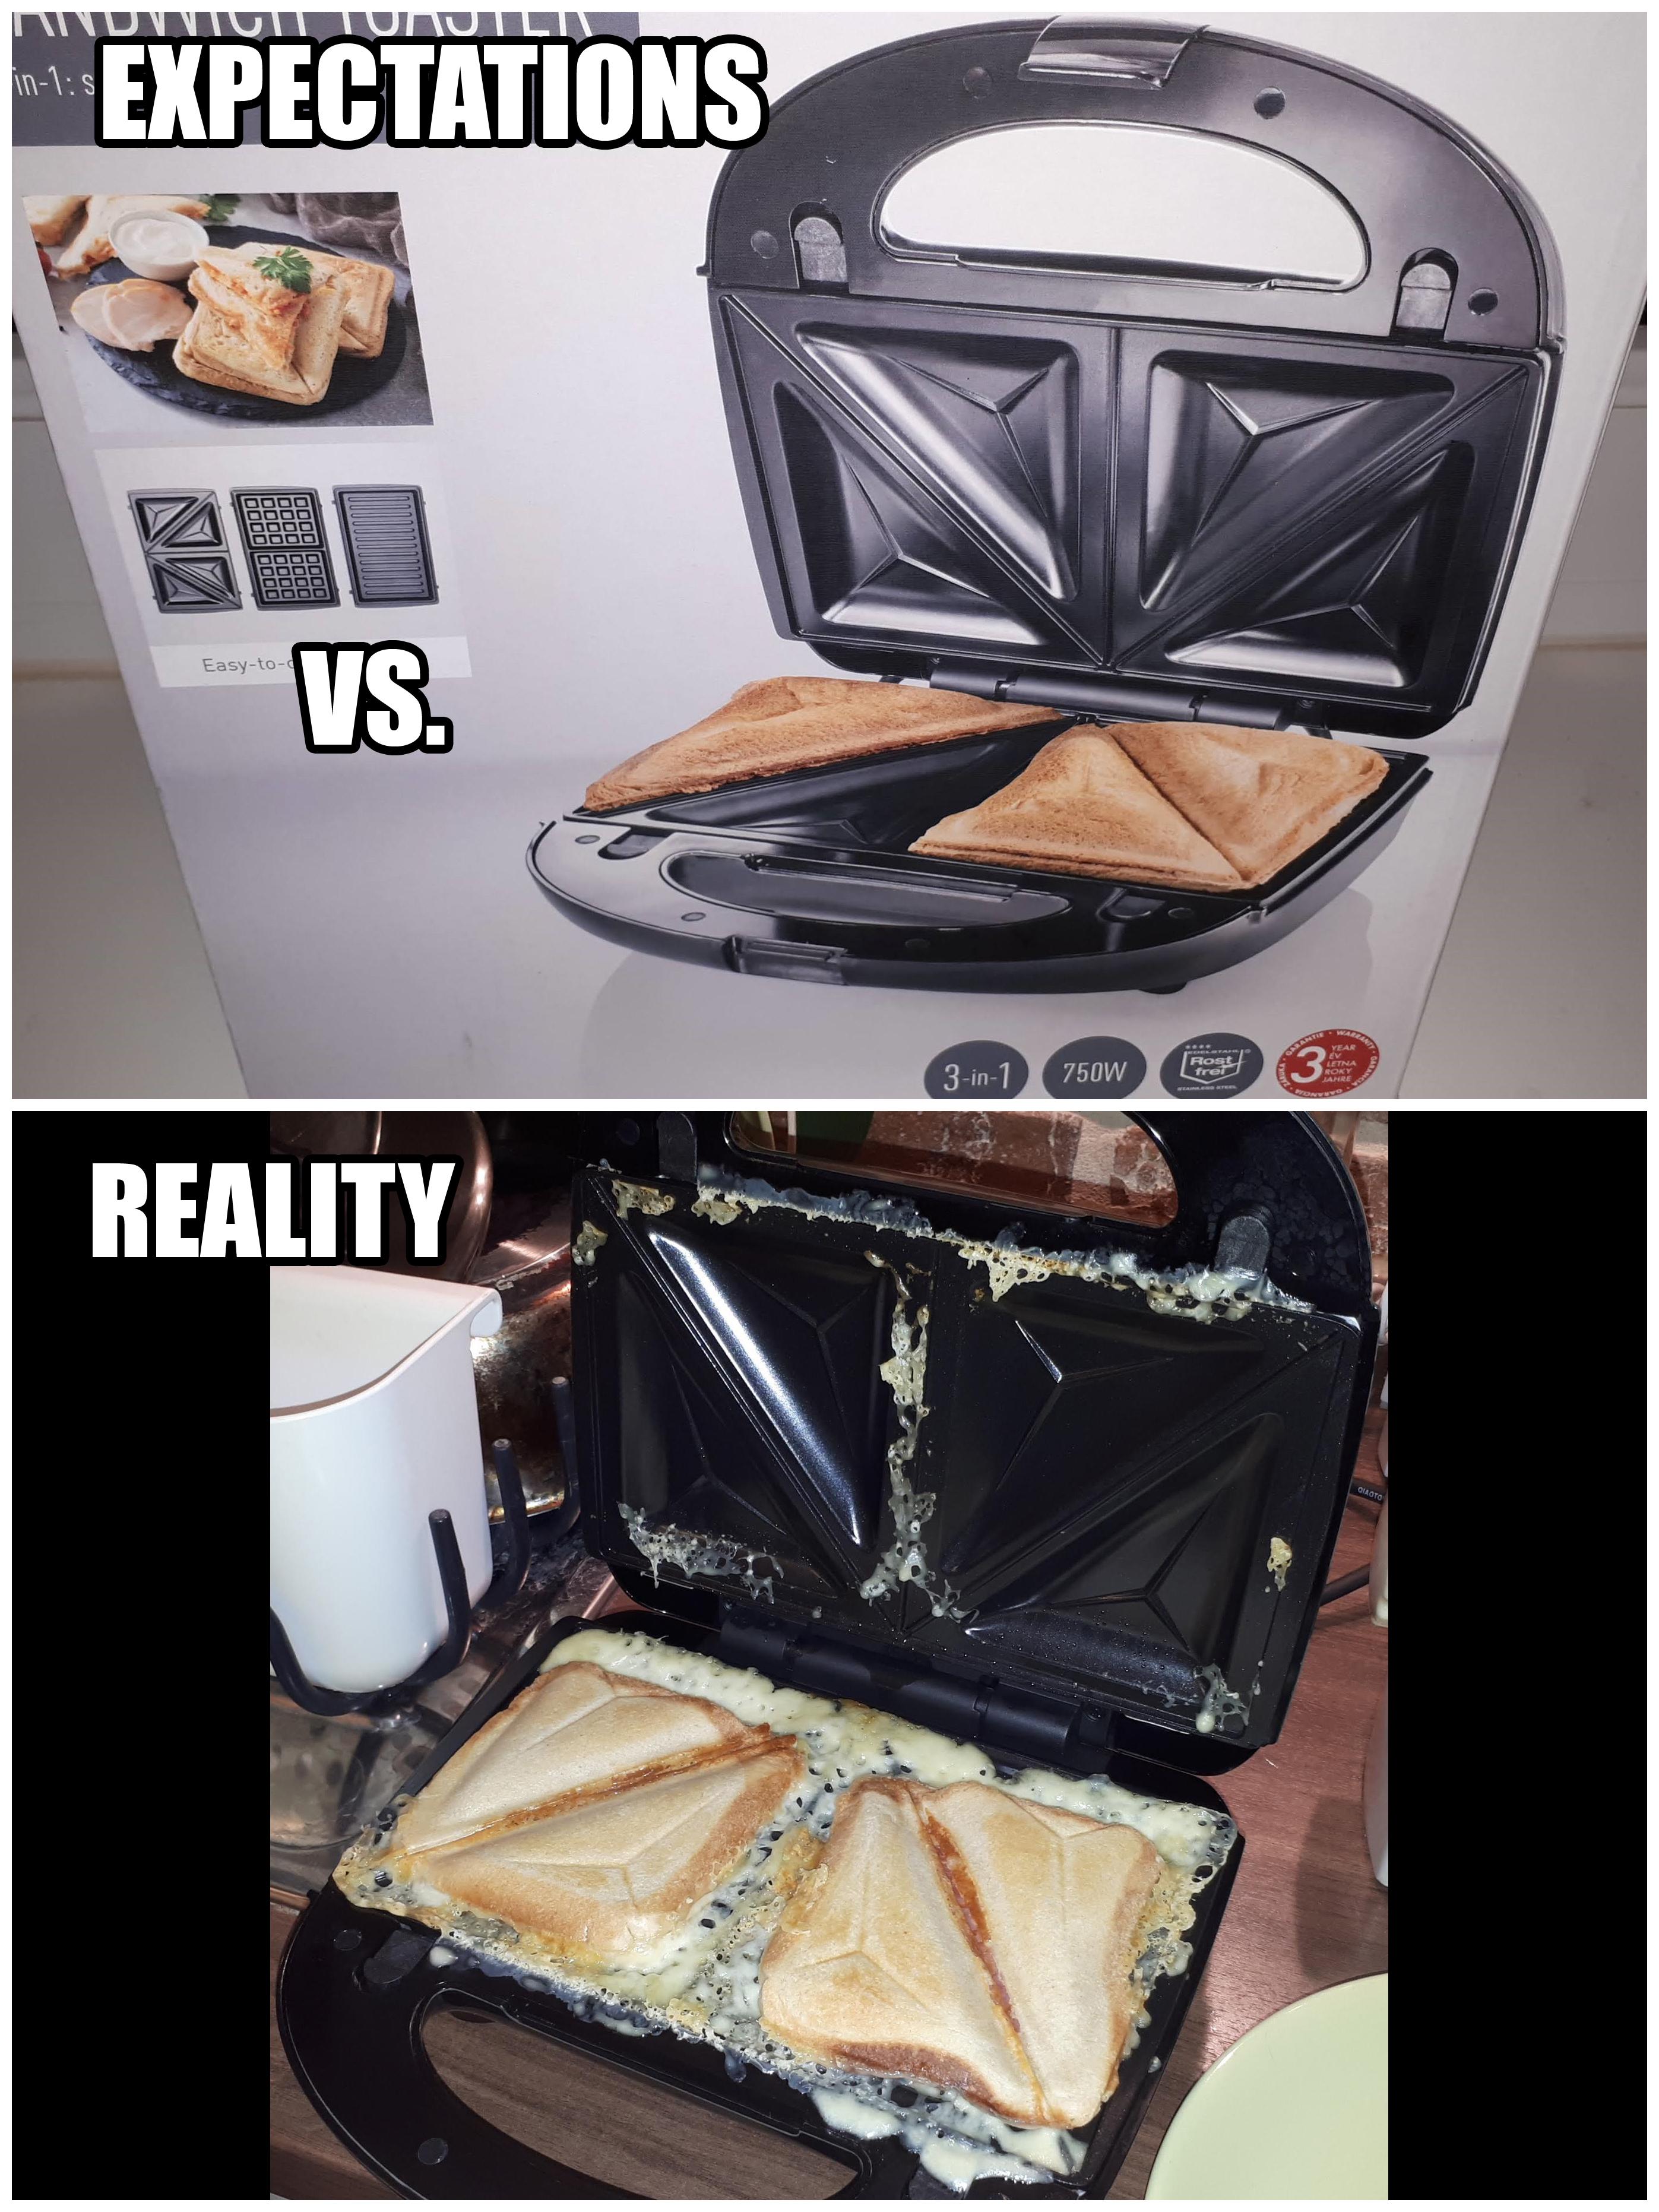 small appliance - Yulunul Expectations 30 E 39 Reality